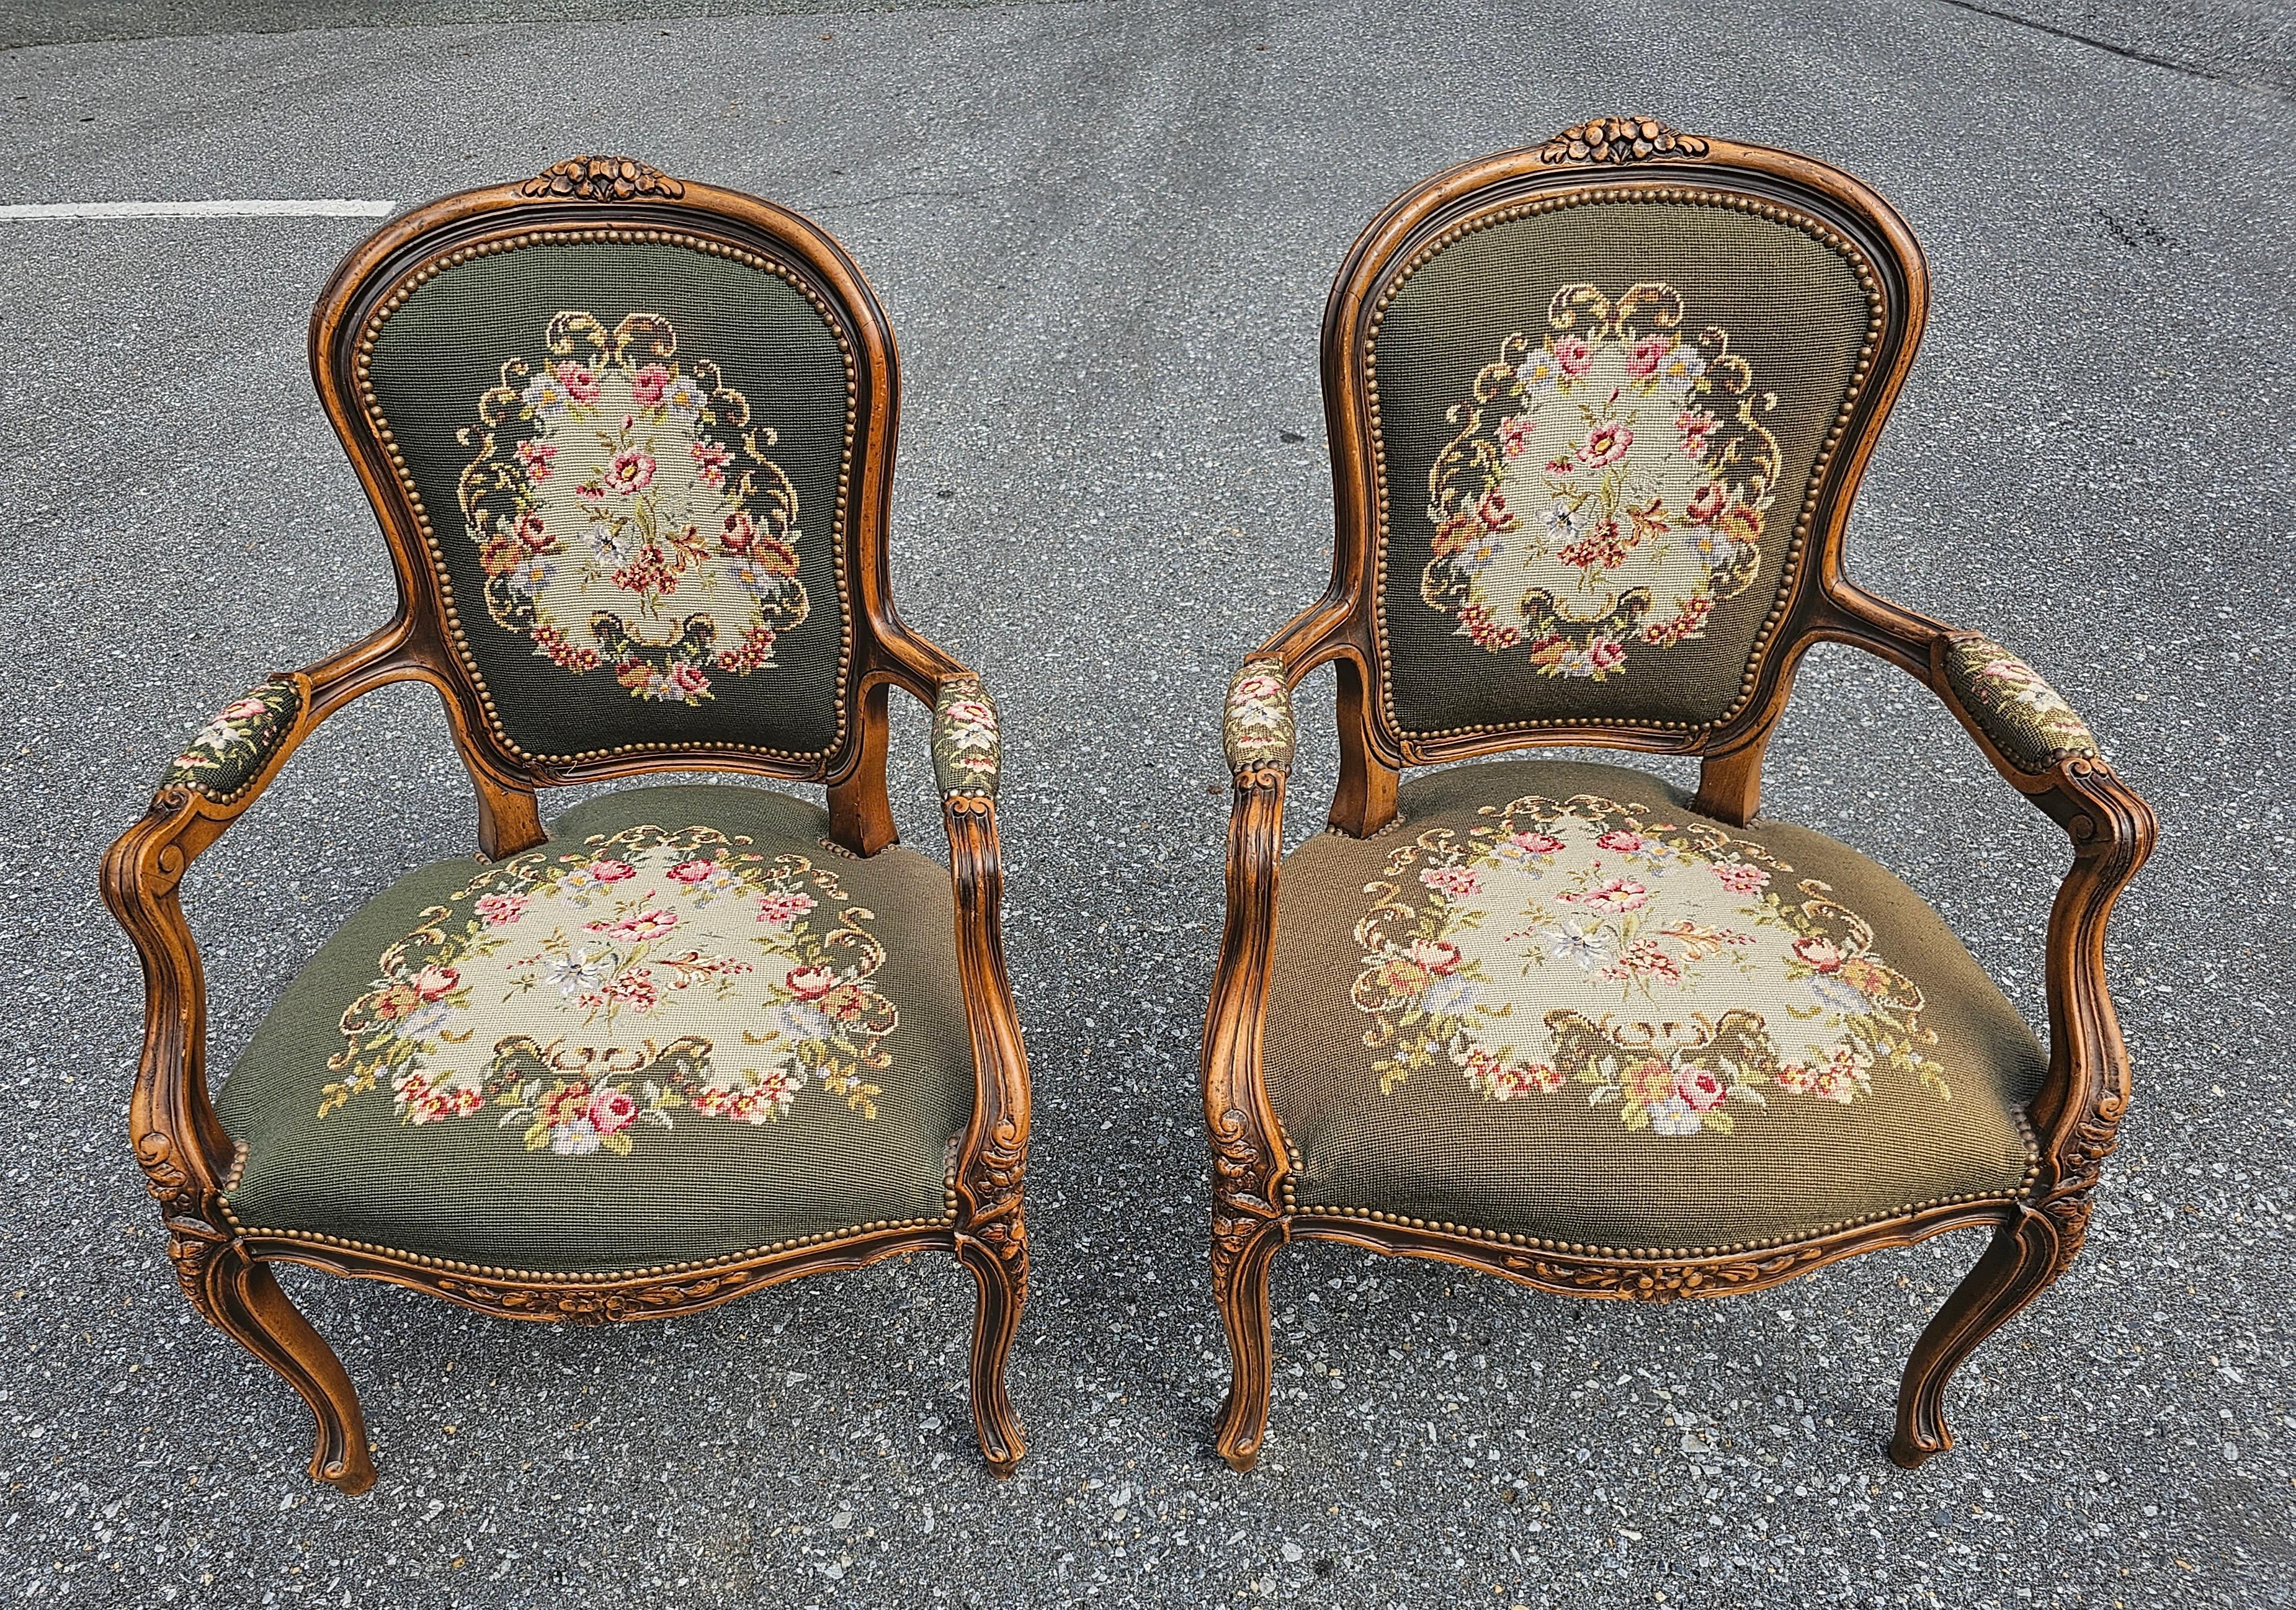 Pair of French Louis XVI Carved Fruitwood and Needlepoint Upholstered Bergeres In Good Condition For Sale In Germantown, MD